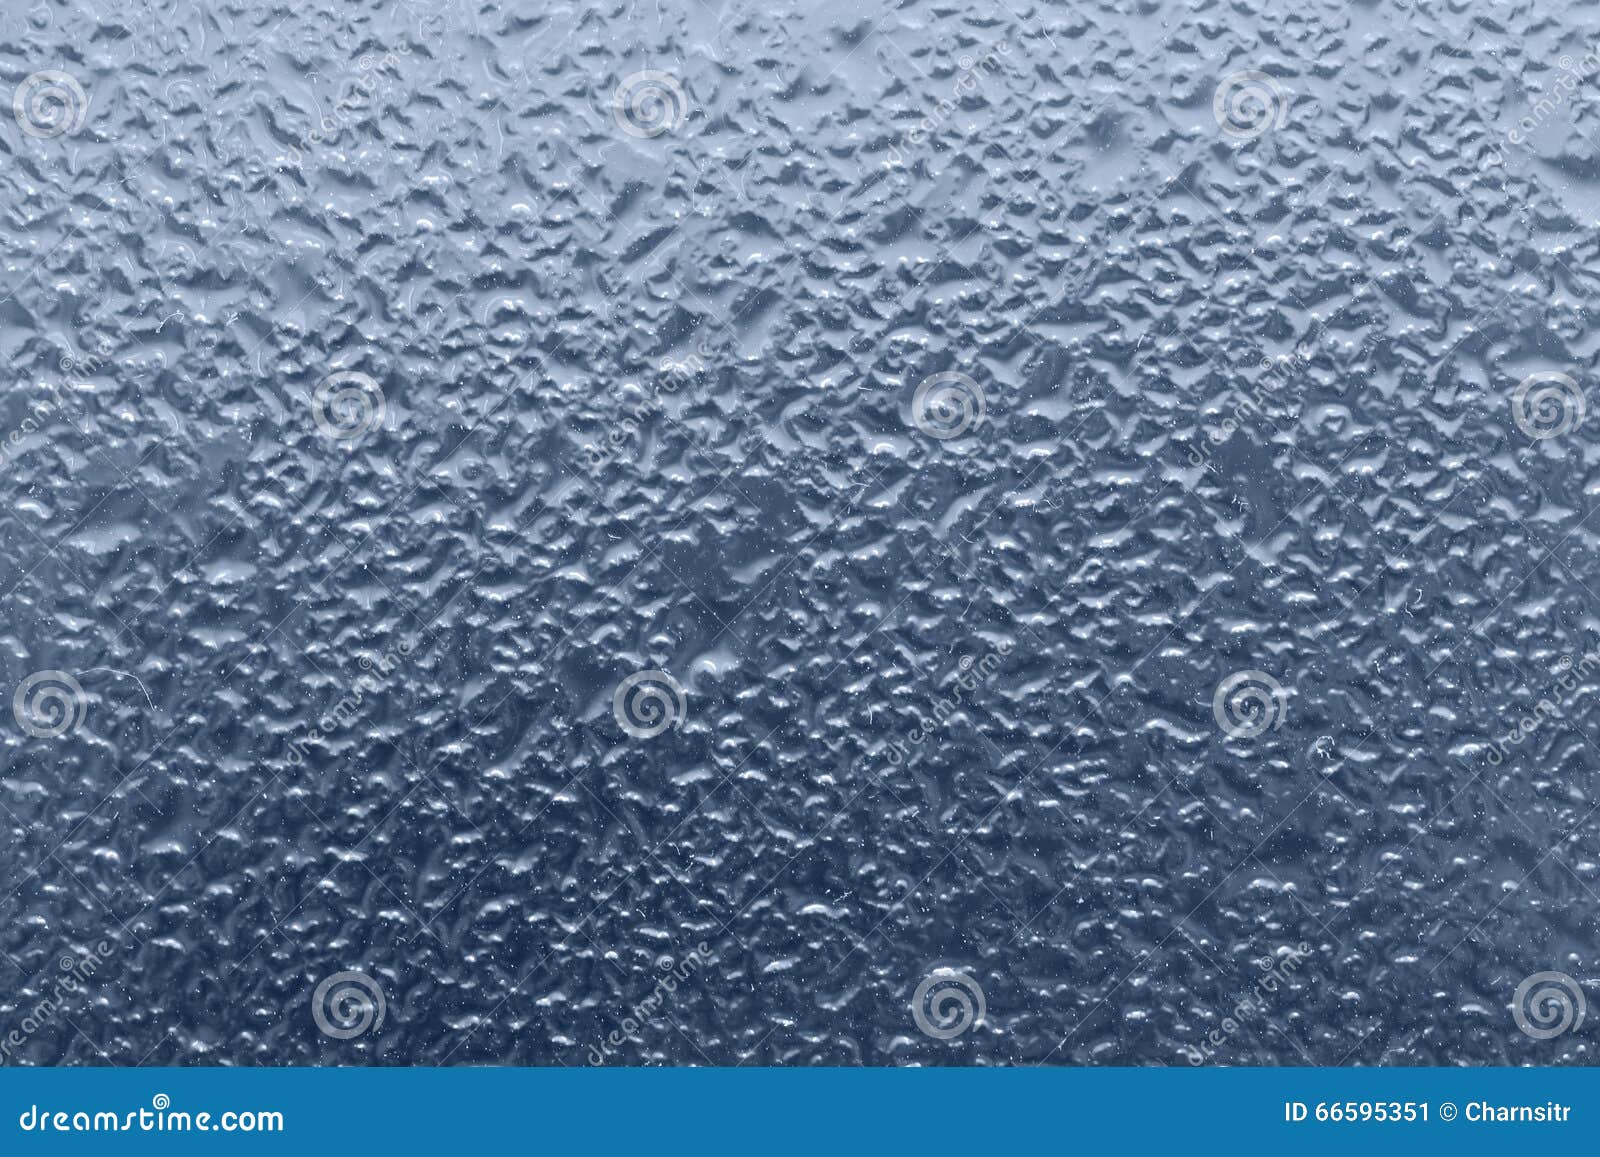 Foggy window background stock image. Image of copy, abstract - 66595351